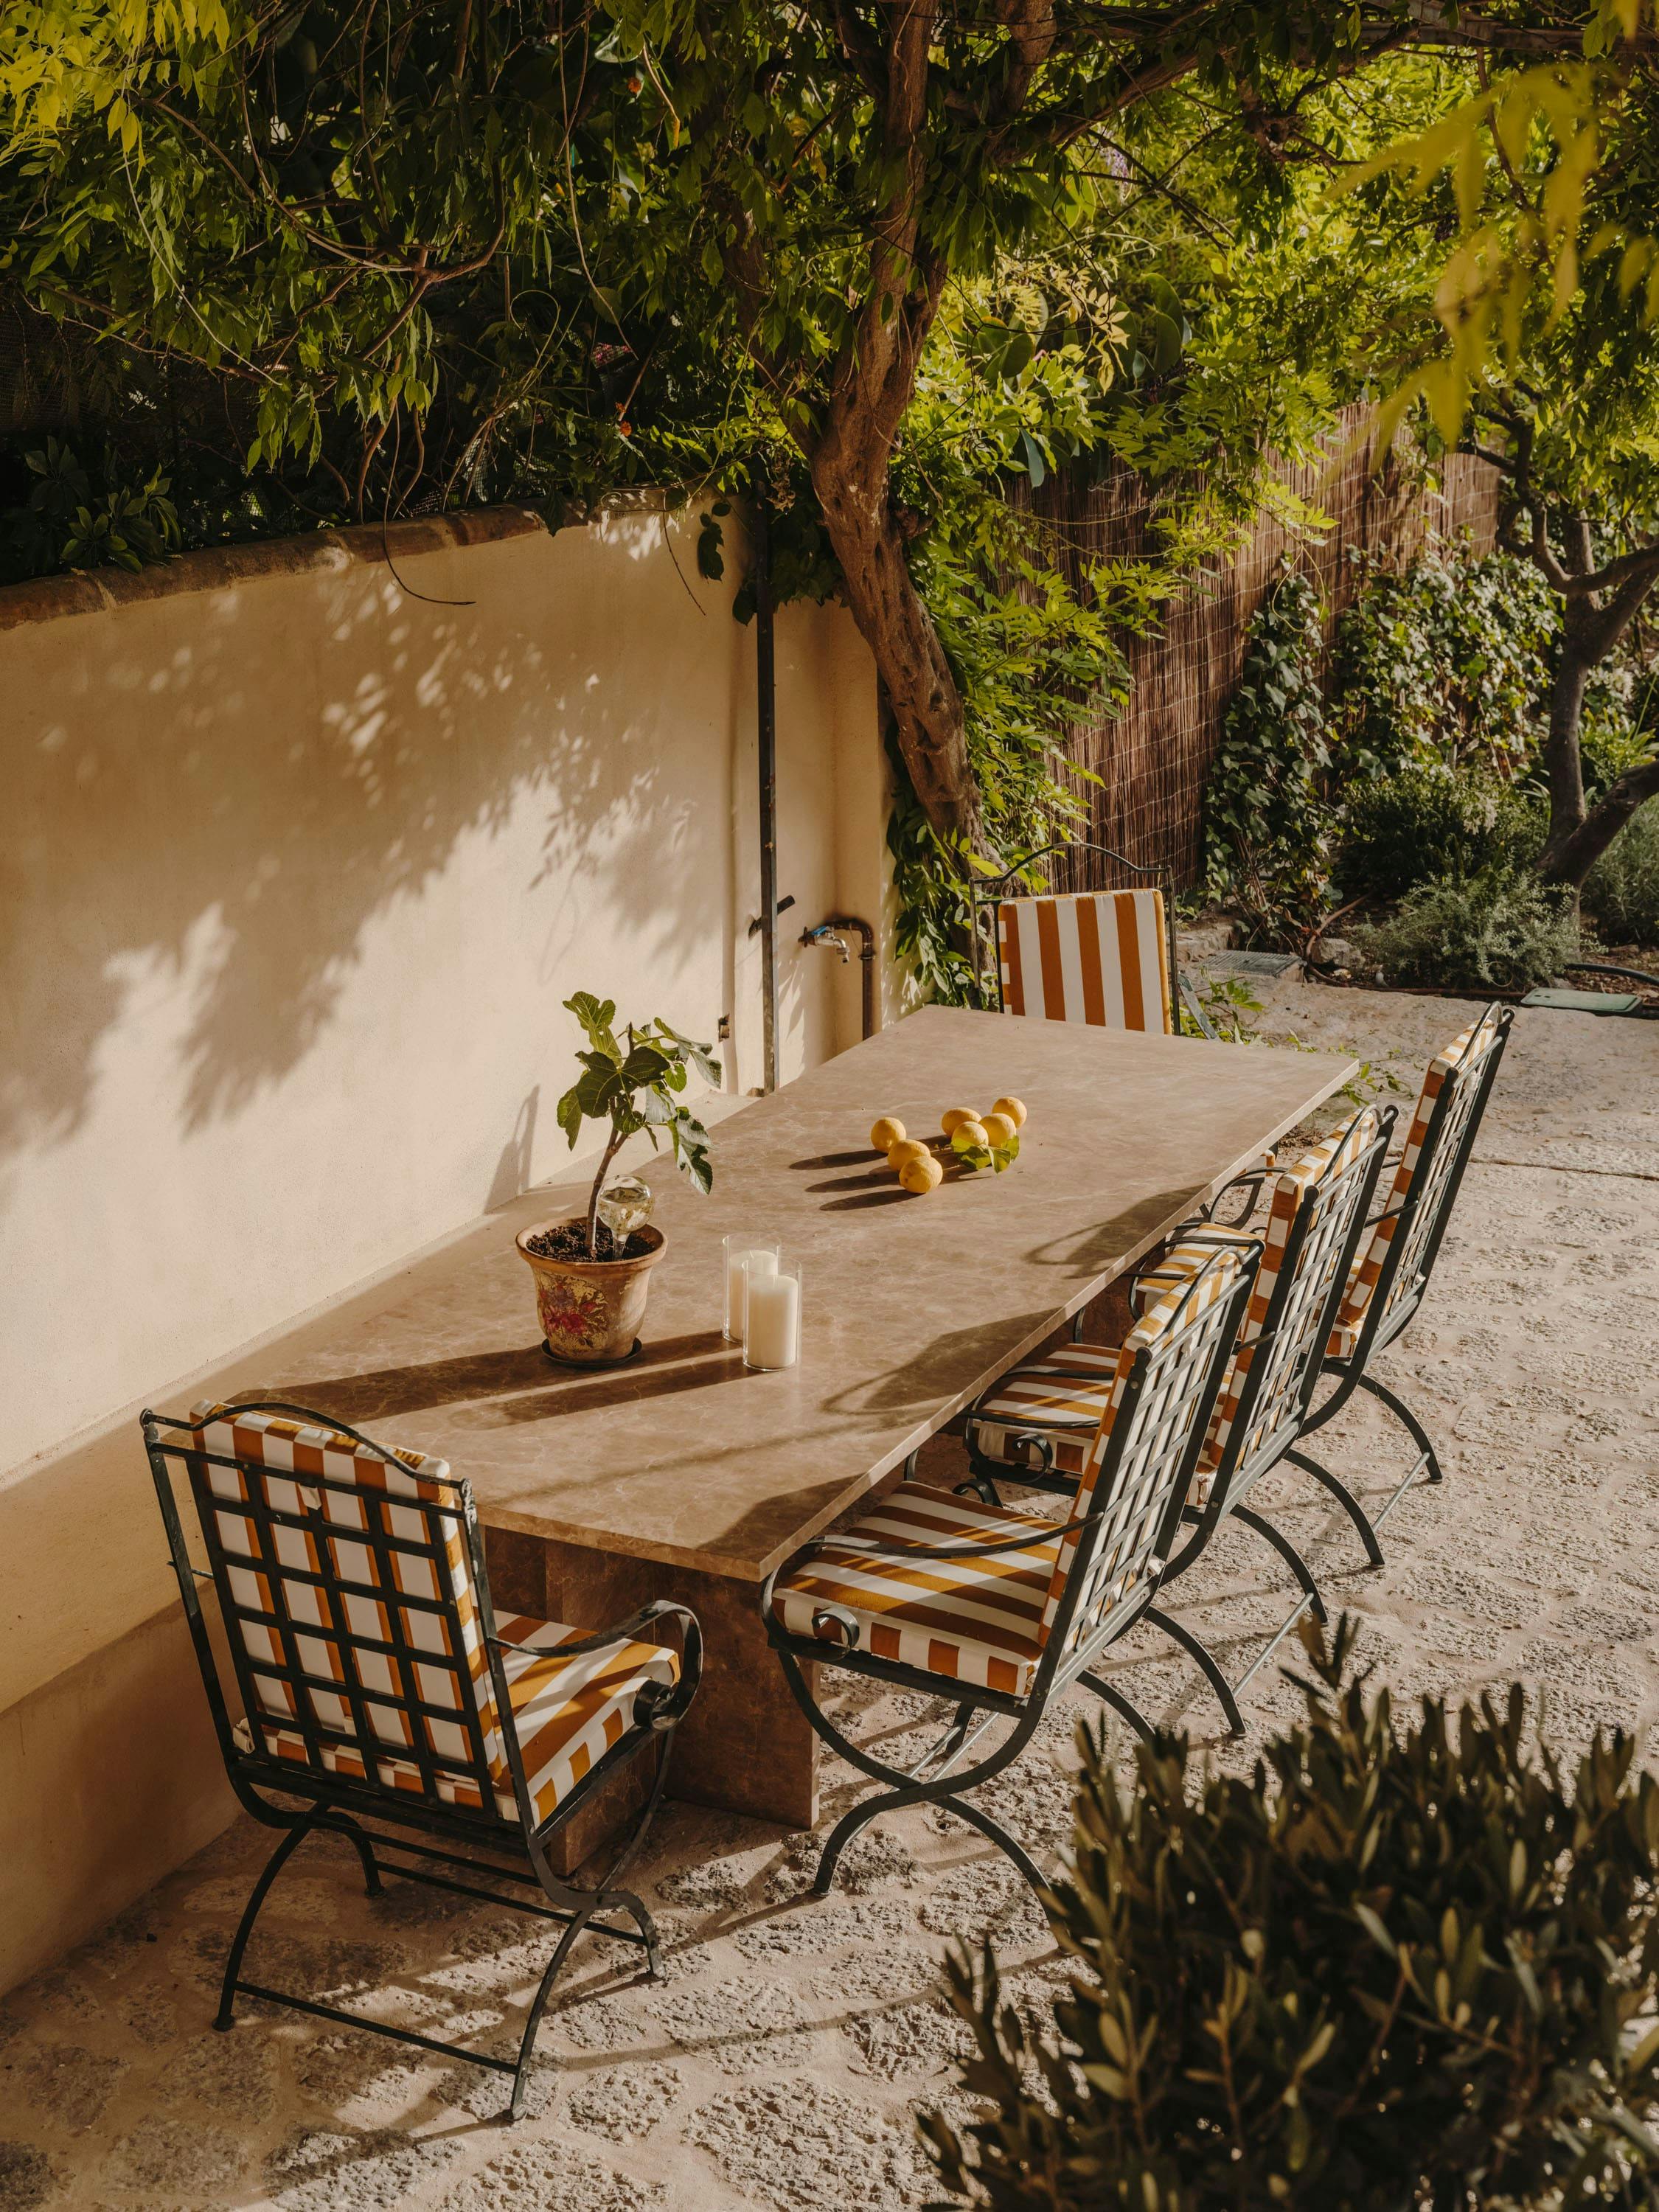 The image features a patio area with a wooden table and chairs set up for a meal. The table is surrounded by chairs, with one chair placed closer to the left side of the table and another chair situated on the right side. A potted plant is placed near the table, adding a touch of greenery to the scene.

In addition to the table and chairs, there are two bowls on the table, one closer to the left side and the other closer to the right side. A vase is also present on the table, enhancing the overall aesthetic of the patio